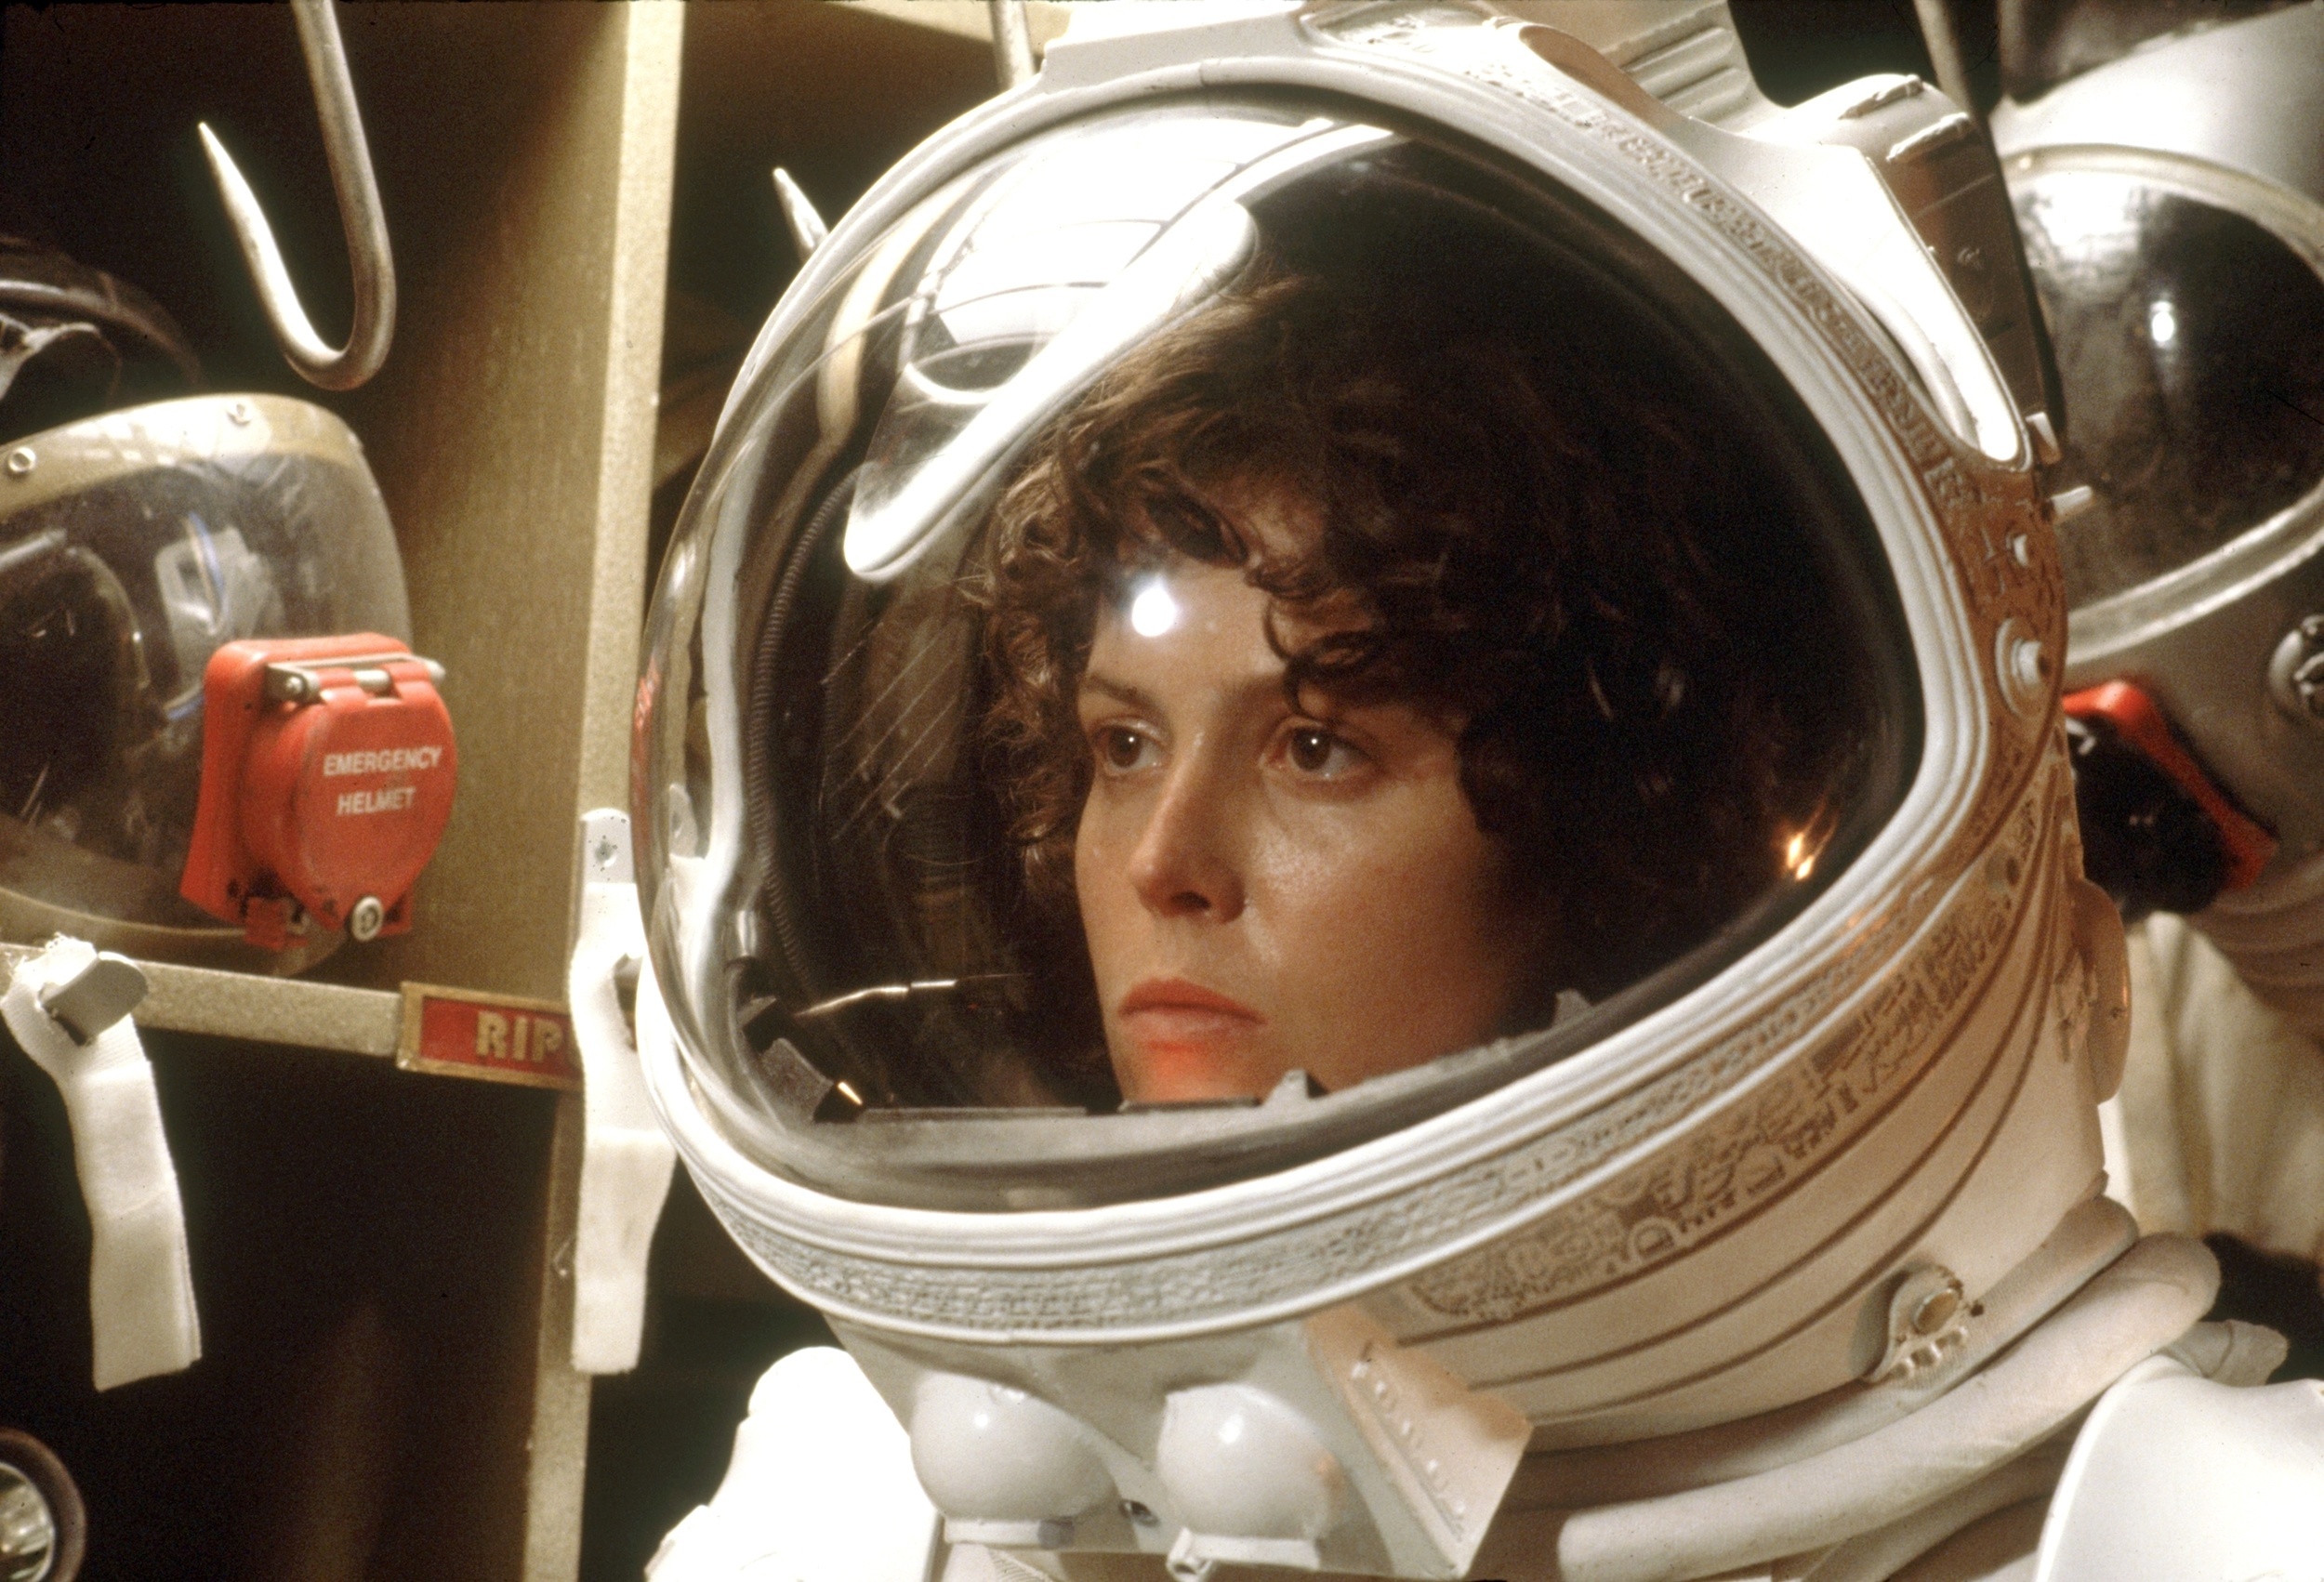 20 facts you might not know about 'Alien'